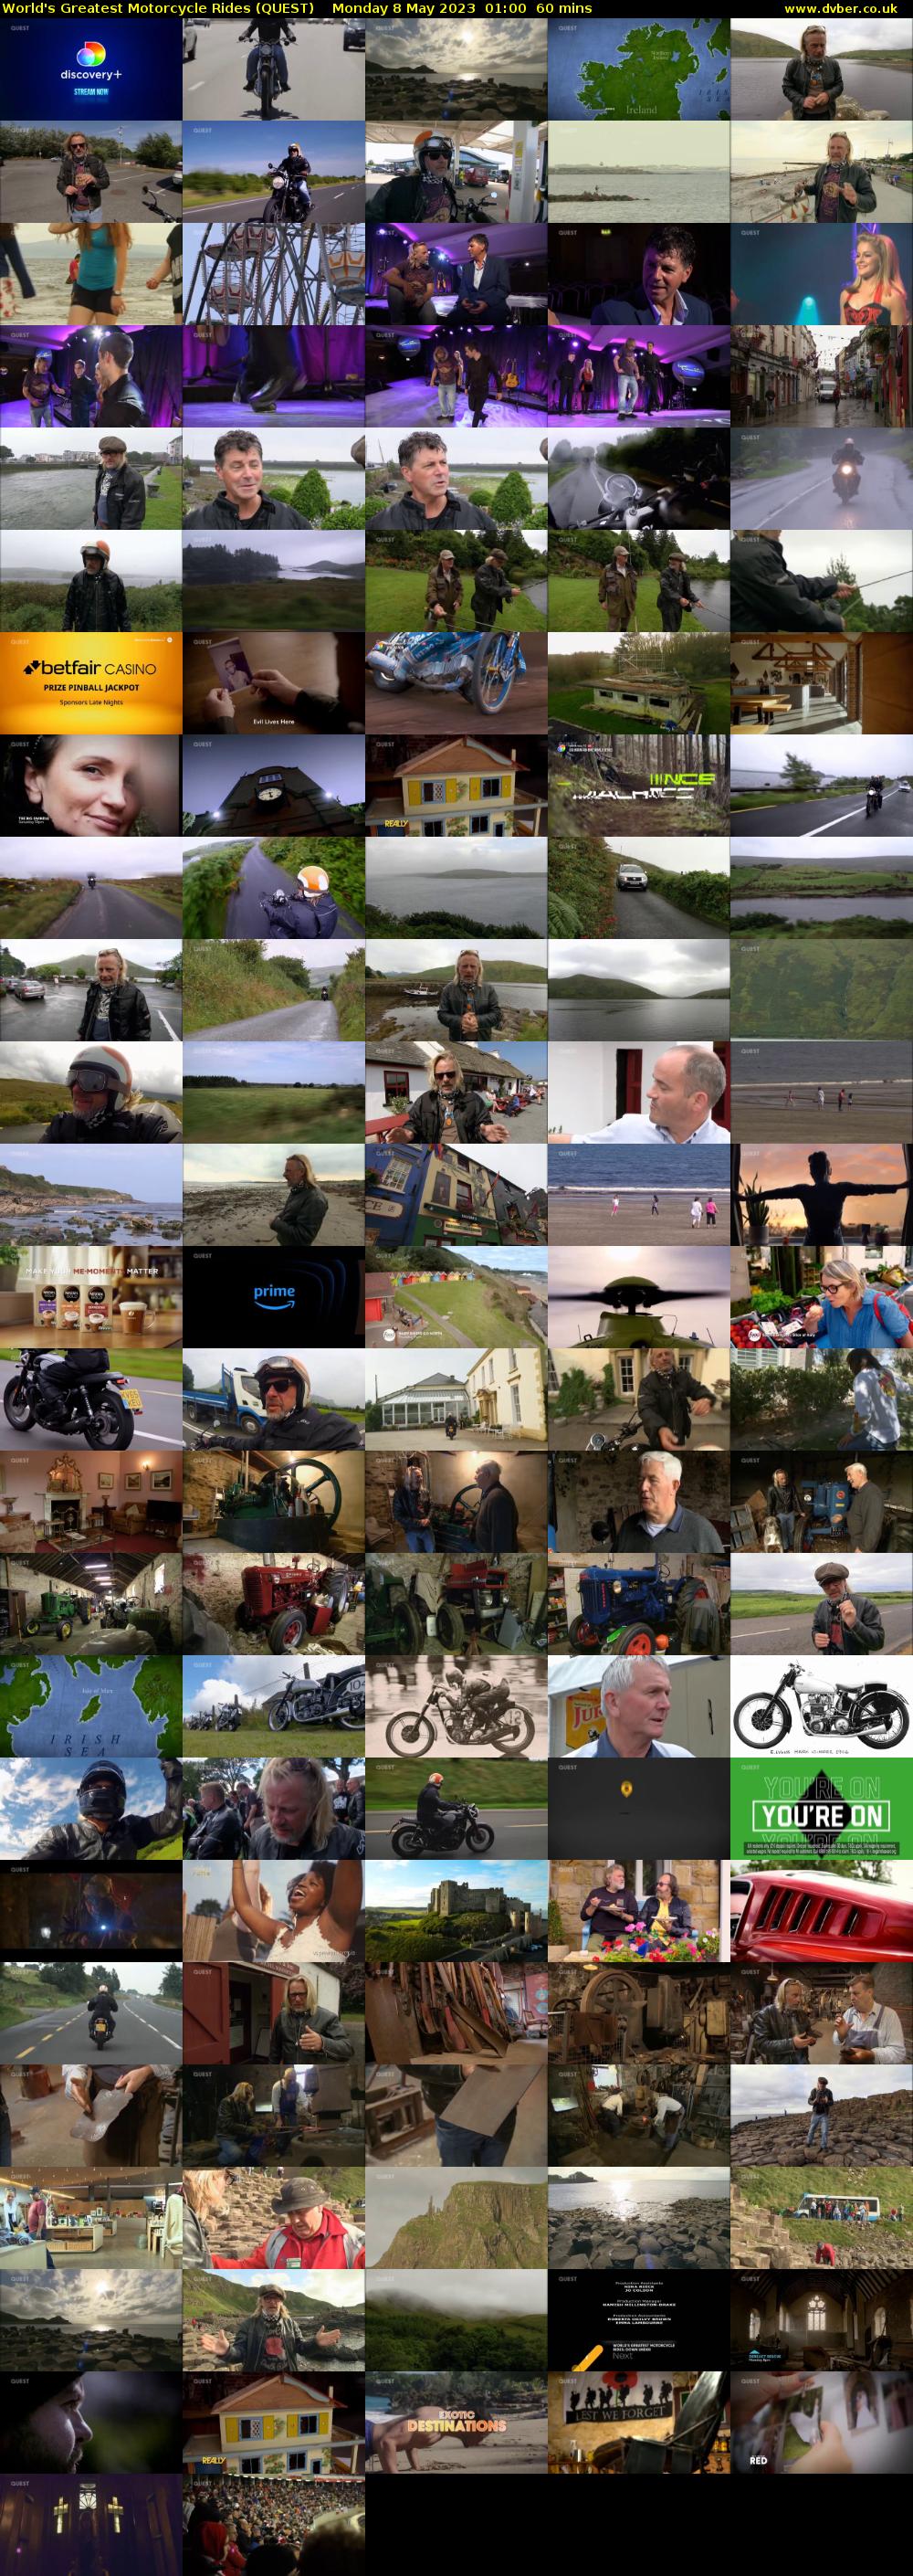 World's Greatest Motorcycle Rides (QUEST) Monday 8 May 2023 01:00 - 02:00